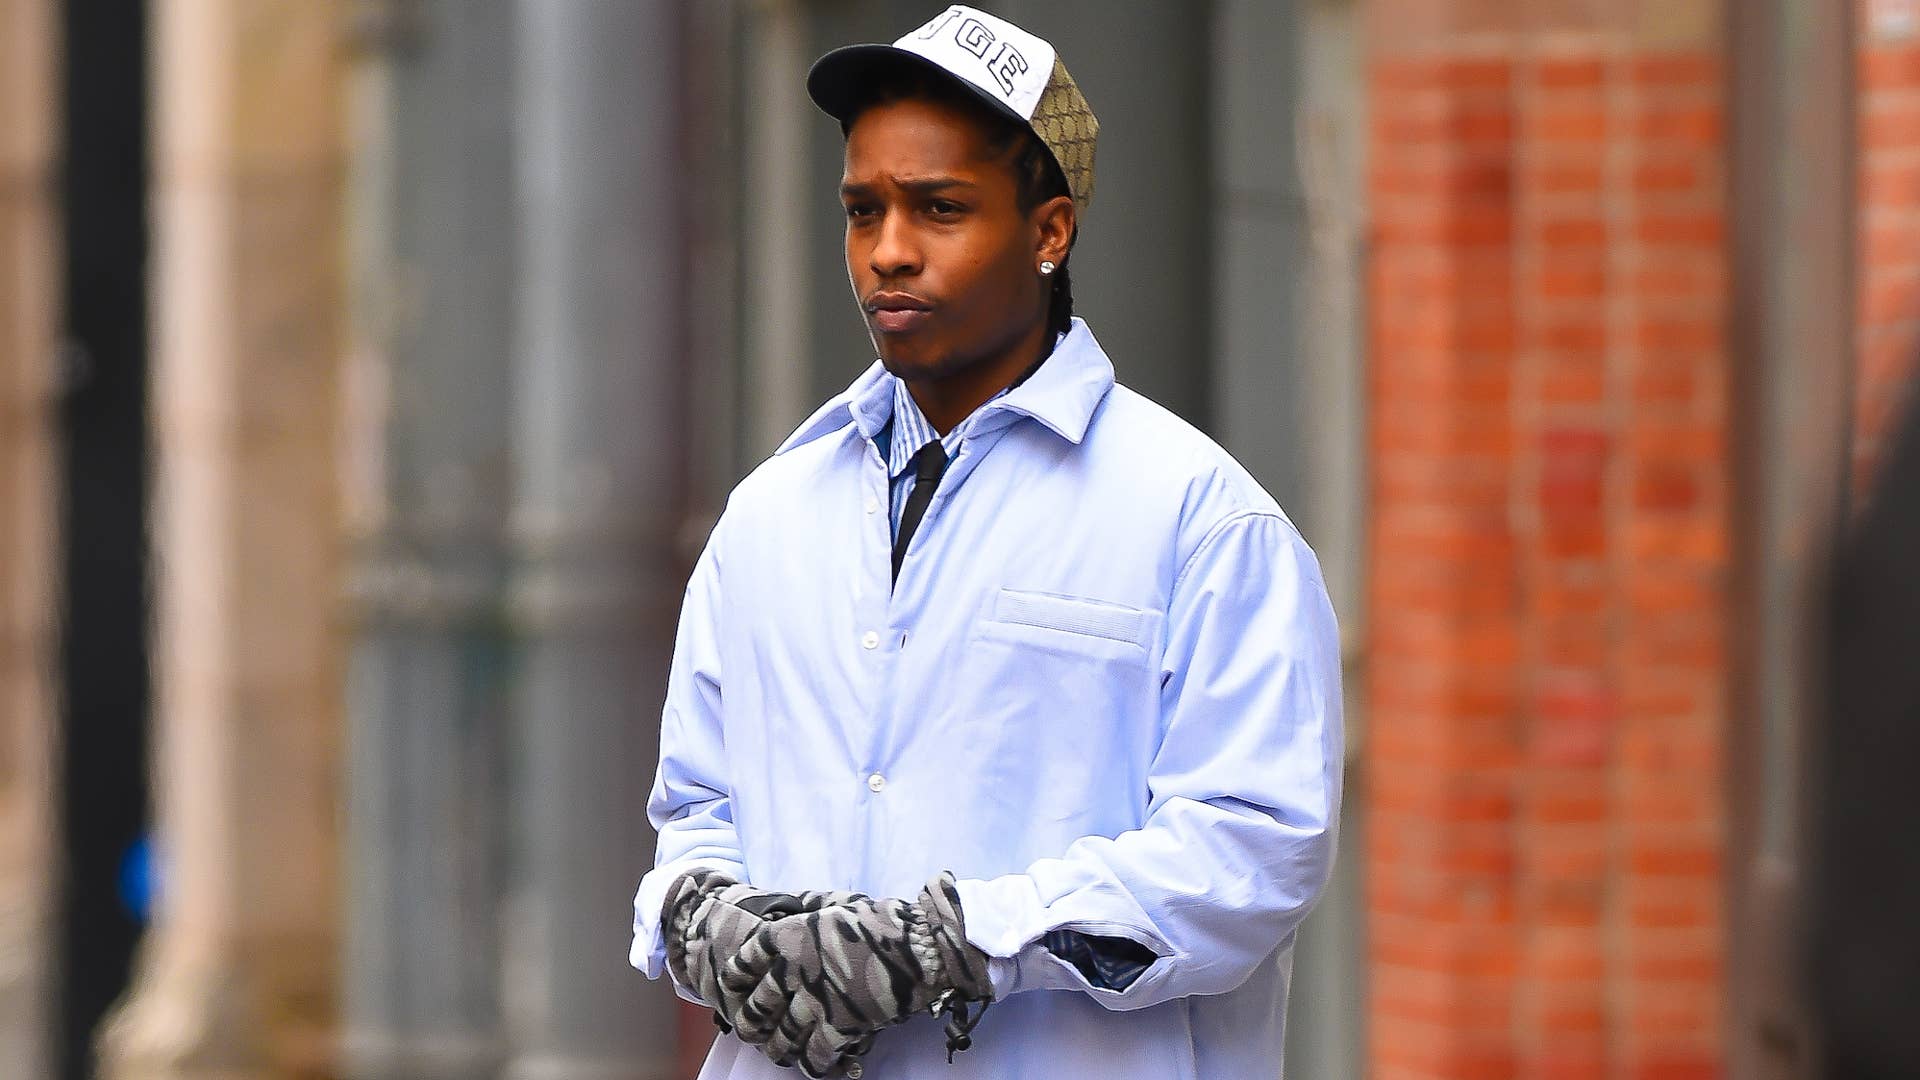 ASAP Rocky is pictured outside wearing gloves and a hat